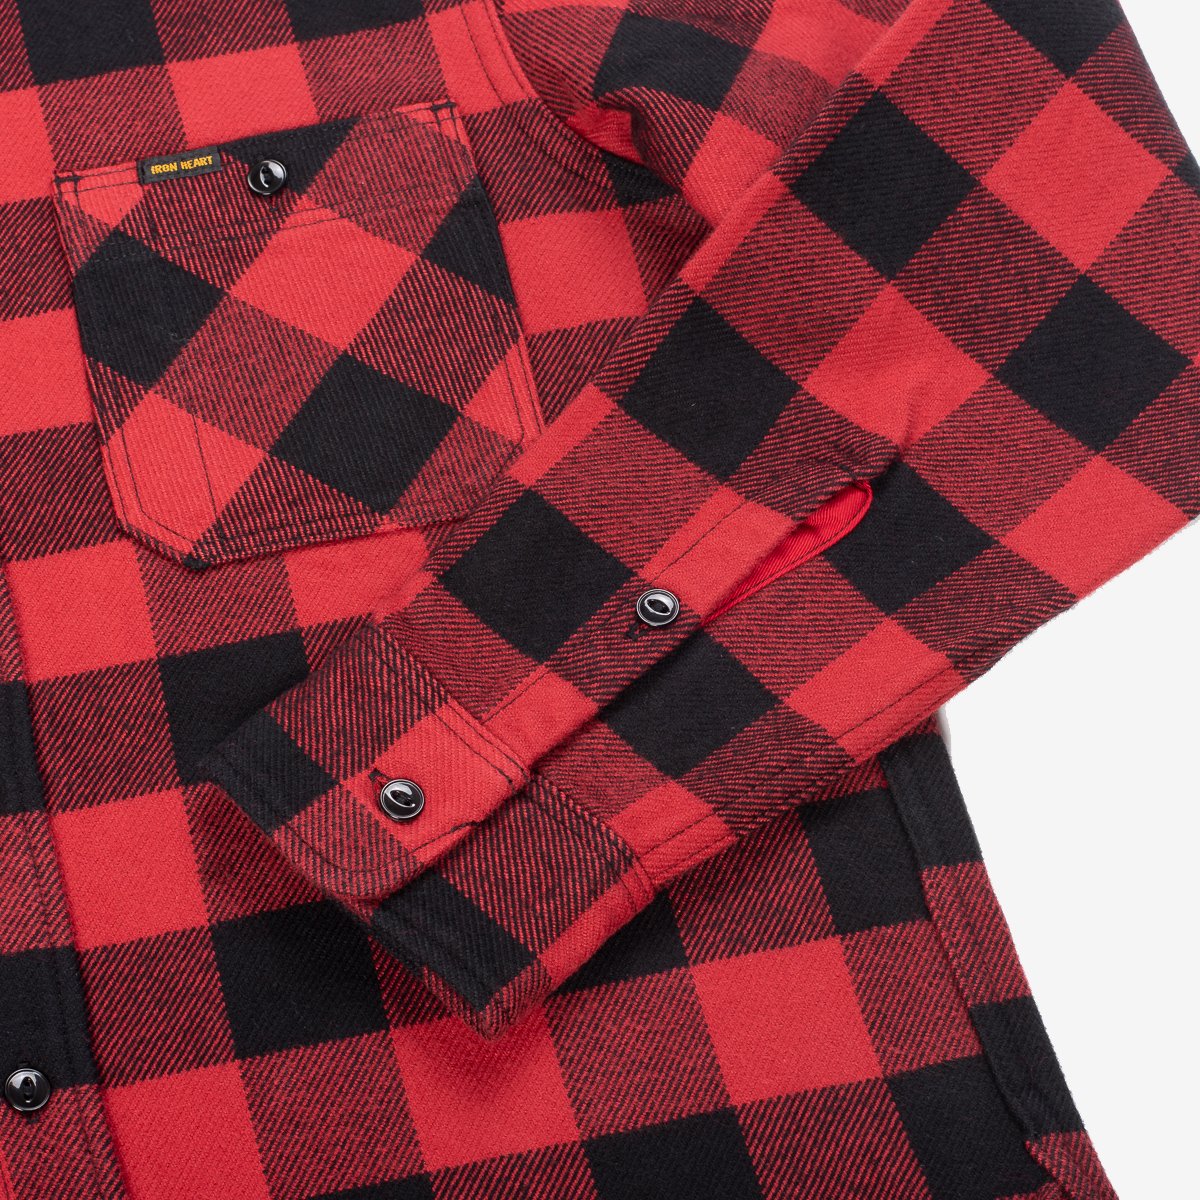 IHSH-244-RED Ultra Heavy Flannel Buffalo Check Work Shirt Red/Black